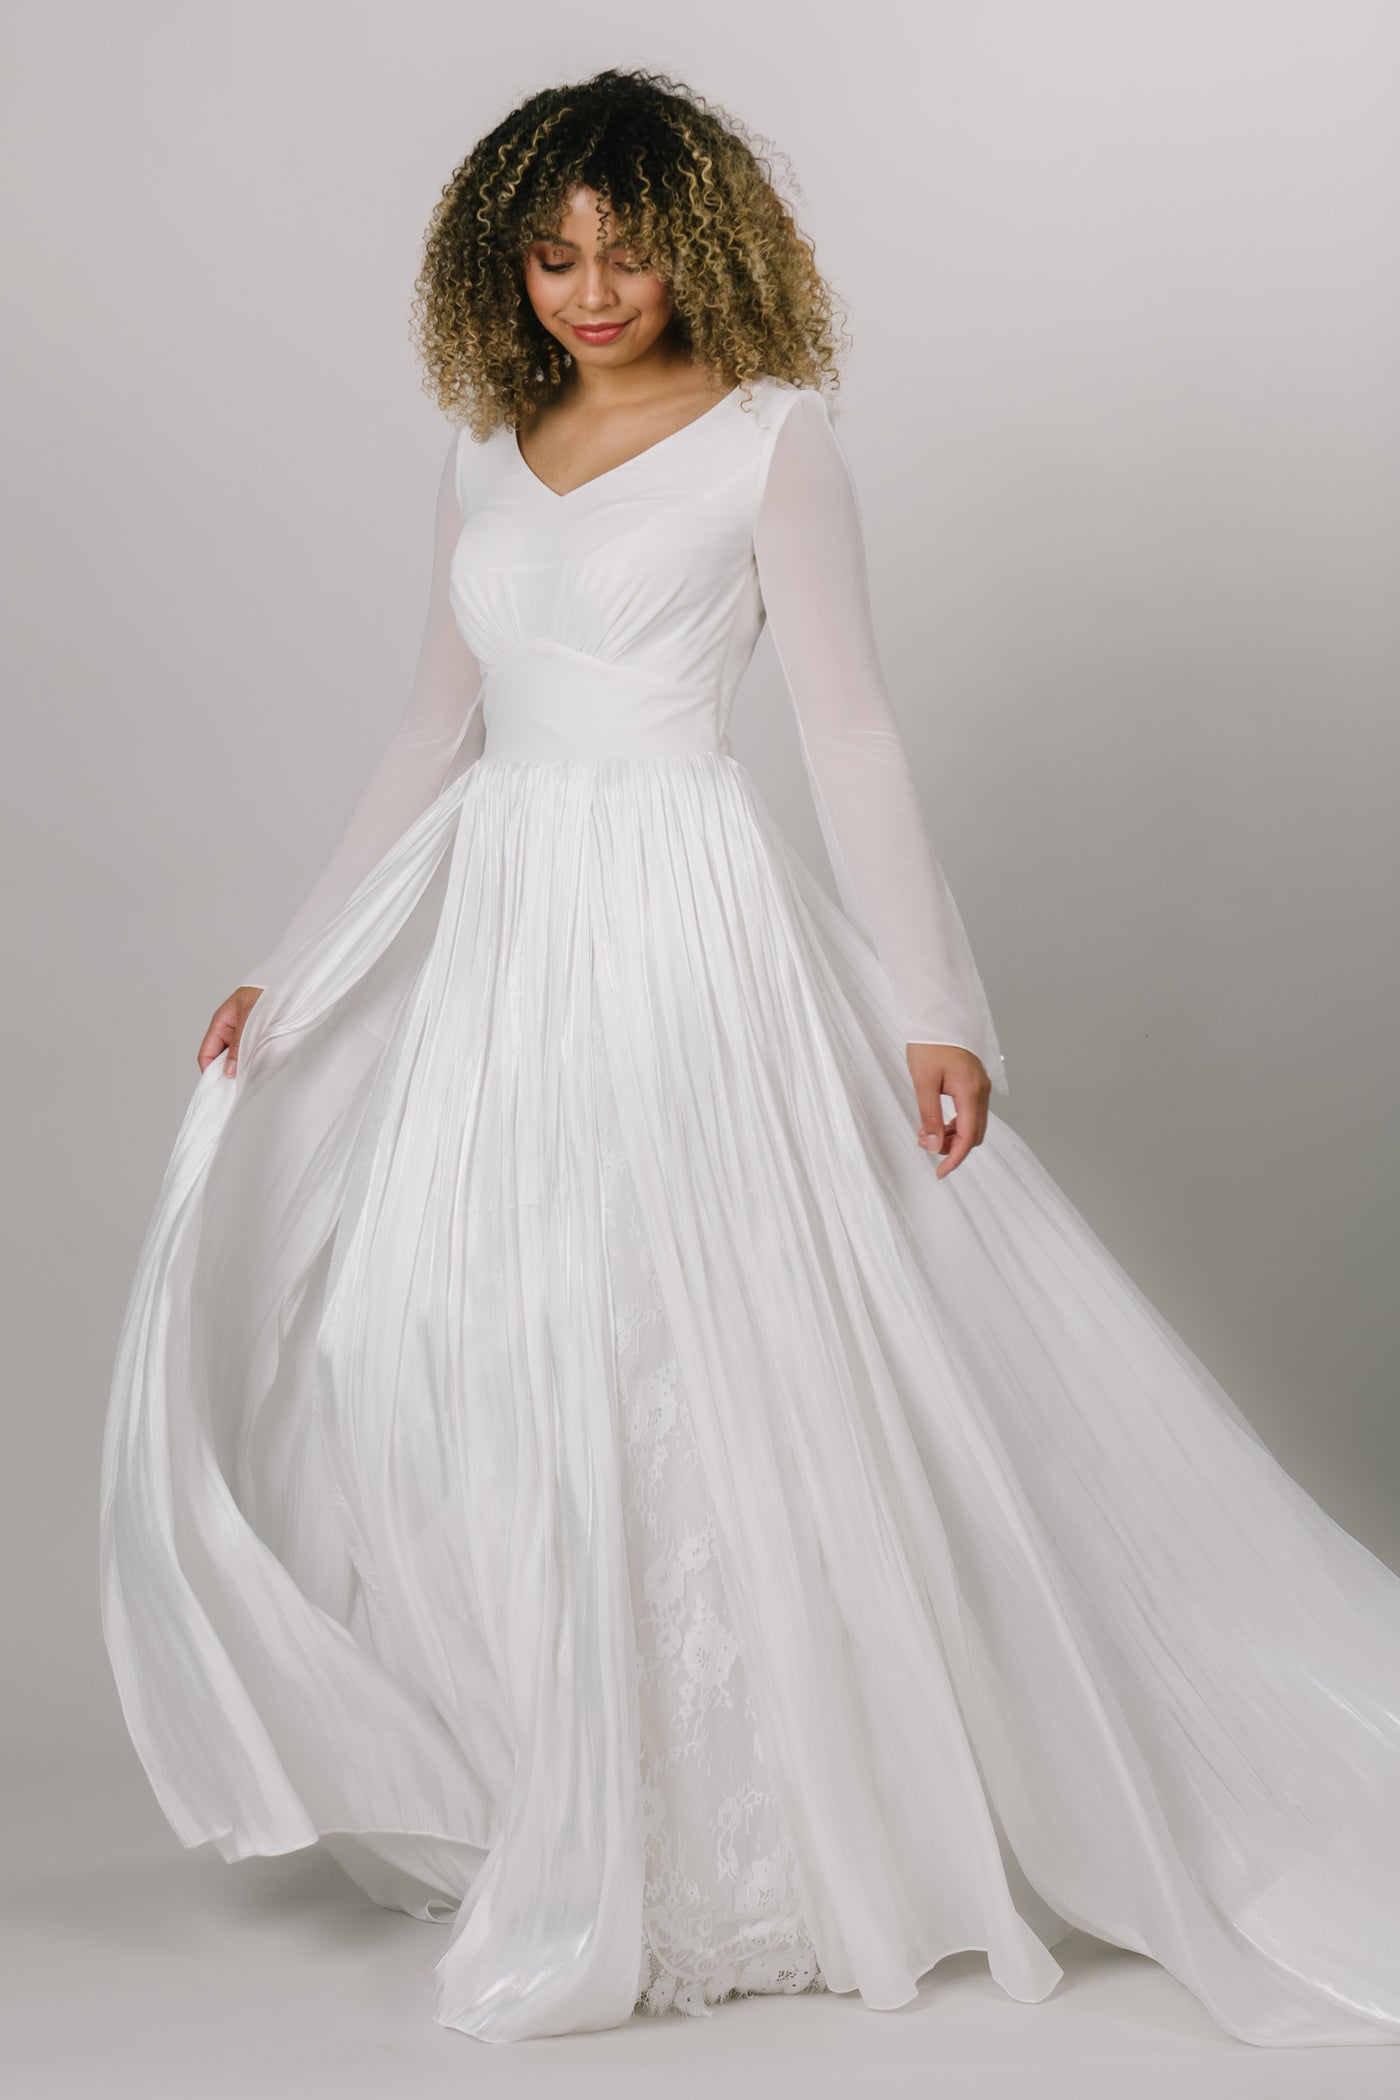 Elegant modest wedding dress with chiffon bell sleeves. This Moments Made Bridal dress has a v-neckline and aline fit. It has chiffon layers and is so flowy. This dress is perfect for twirling and enjoying your wedding day.